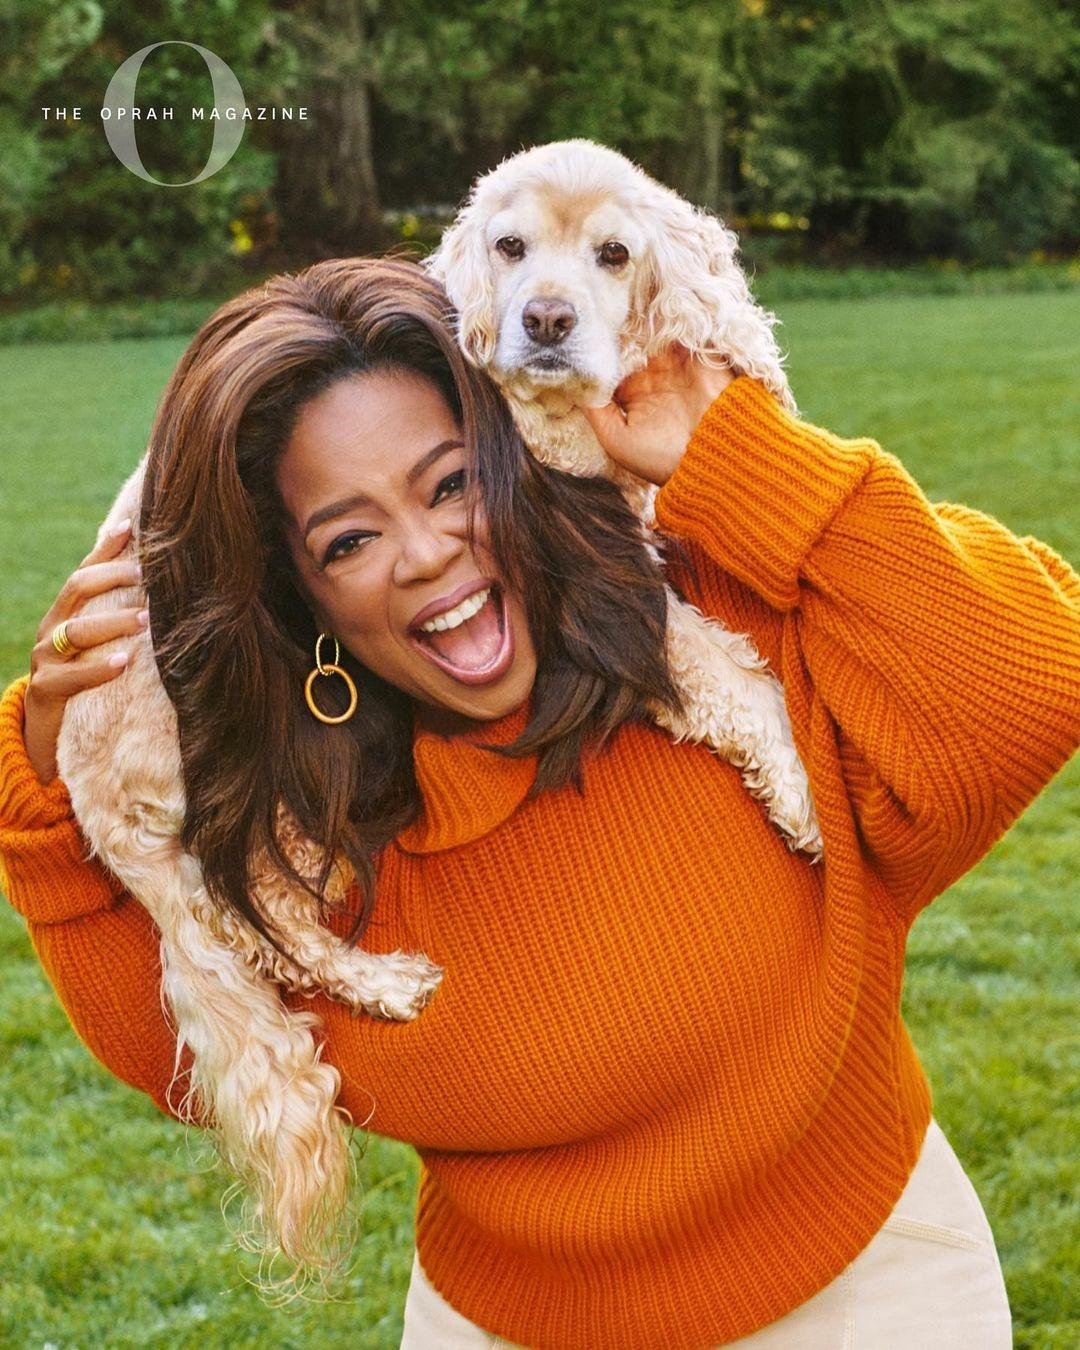 15 Oprah Winfrey rules that will energize you for success